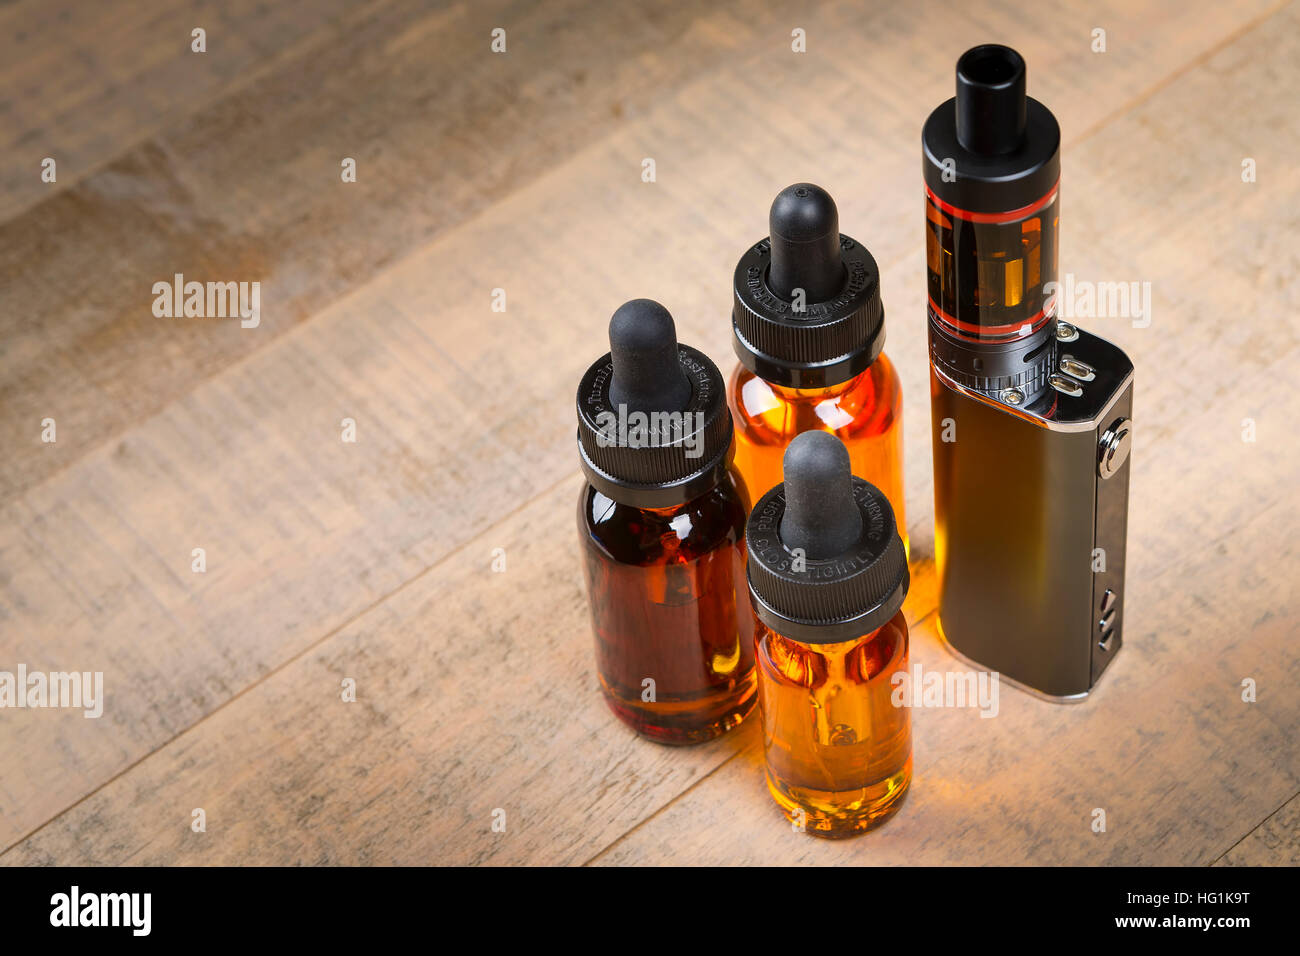 Vaping mod e-cig with tank atomizer and juice bottles over wood background Stock Photo